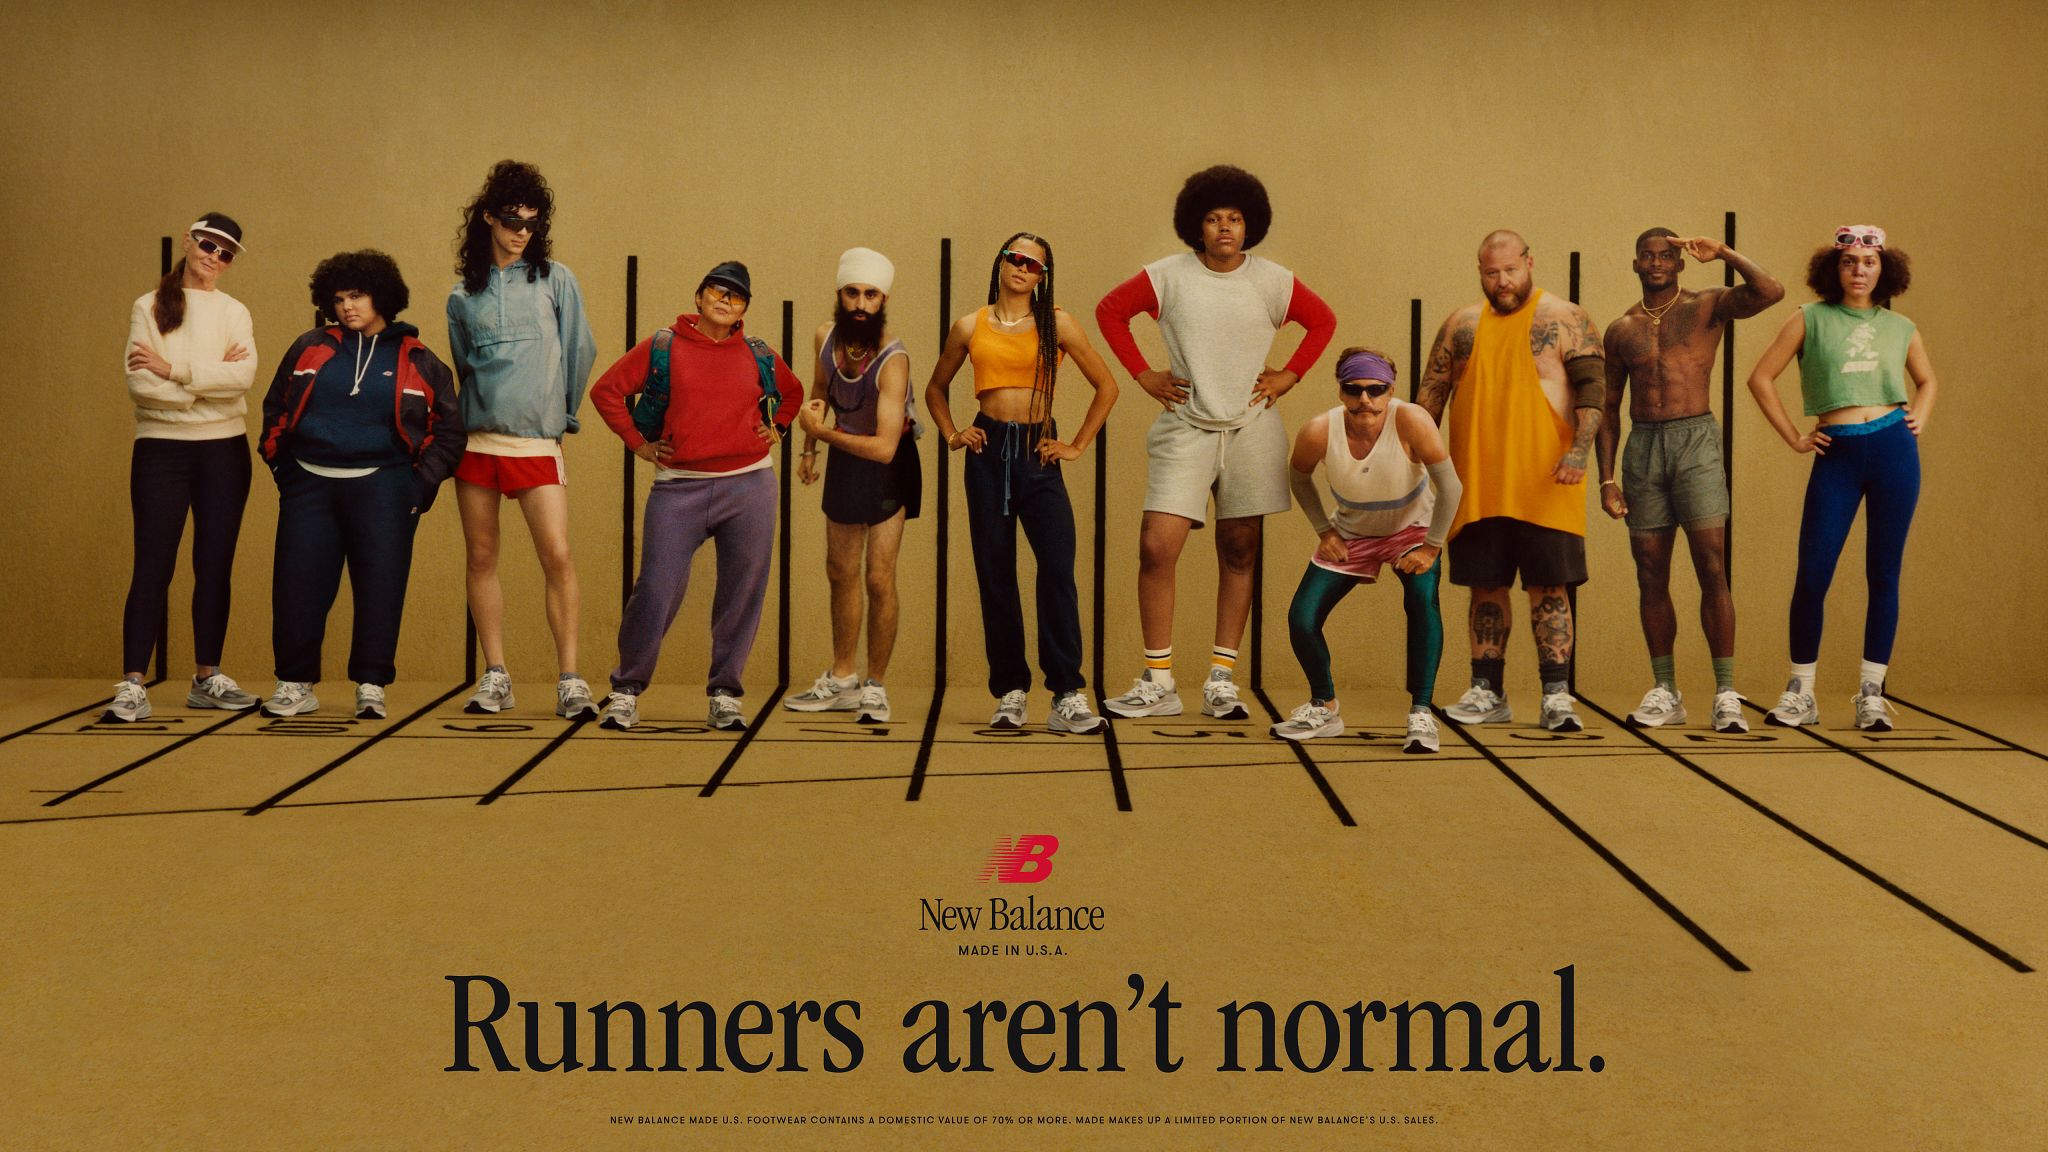 A group of people stand on a track in the new Balance ad. - New Balance